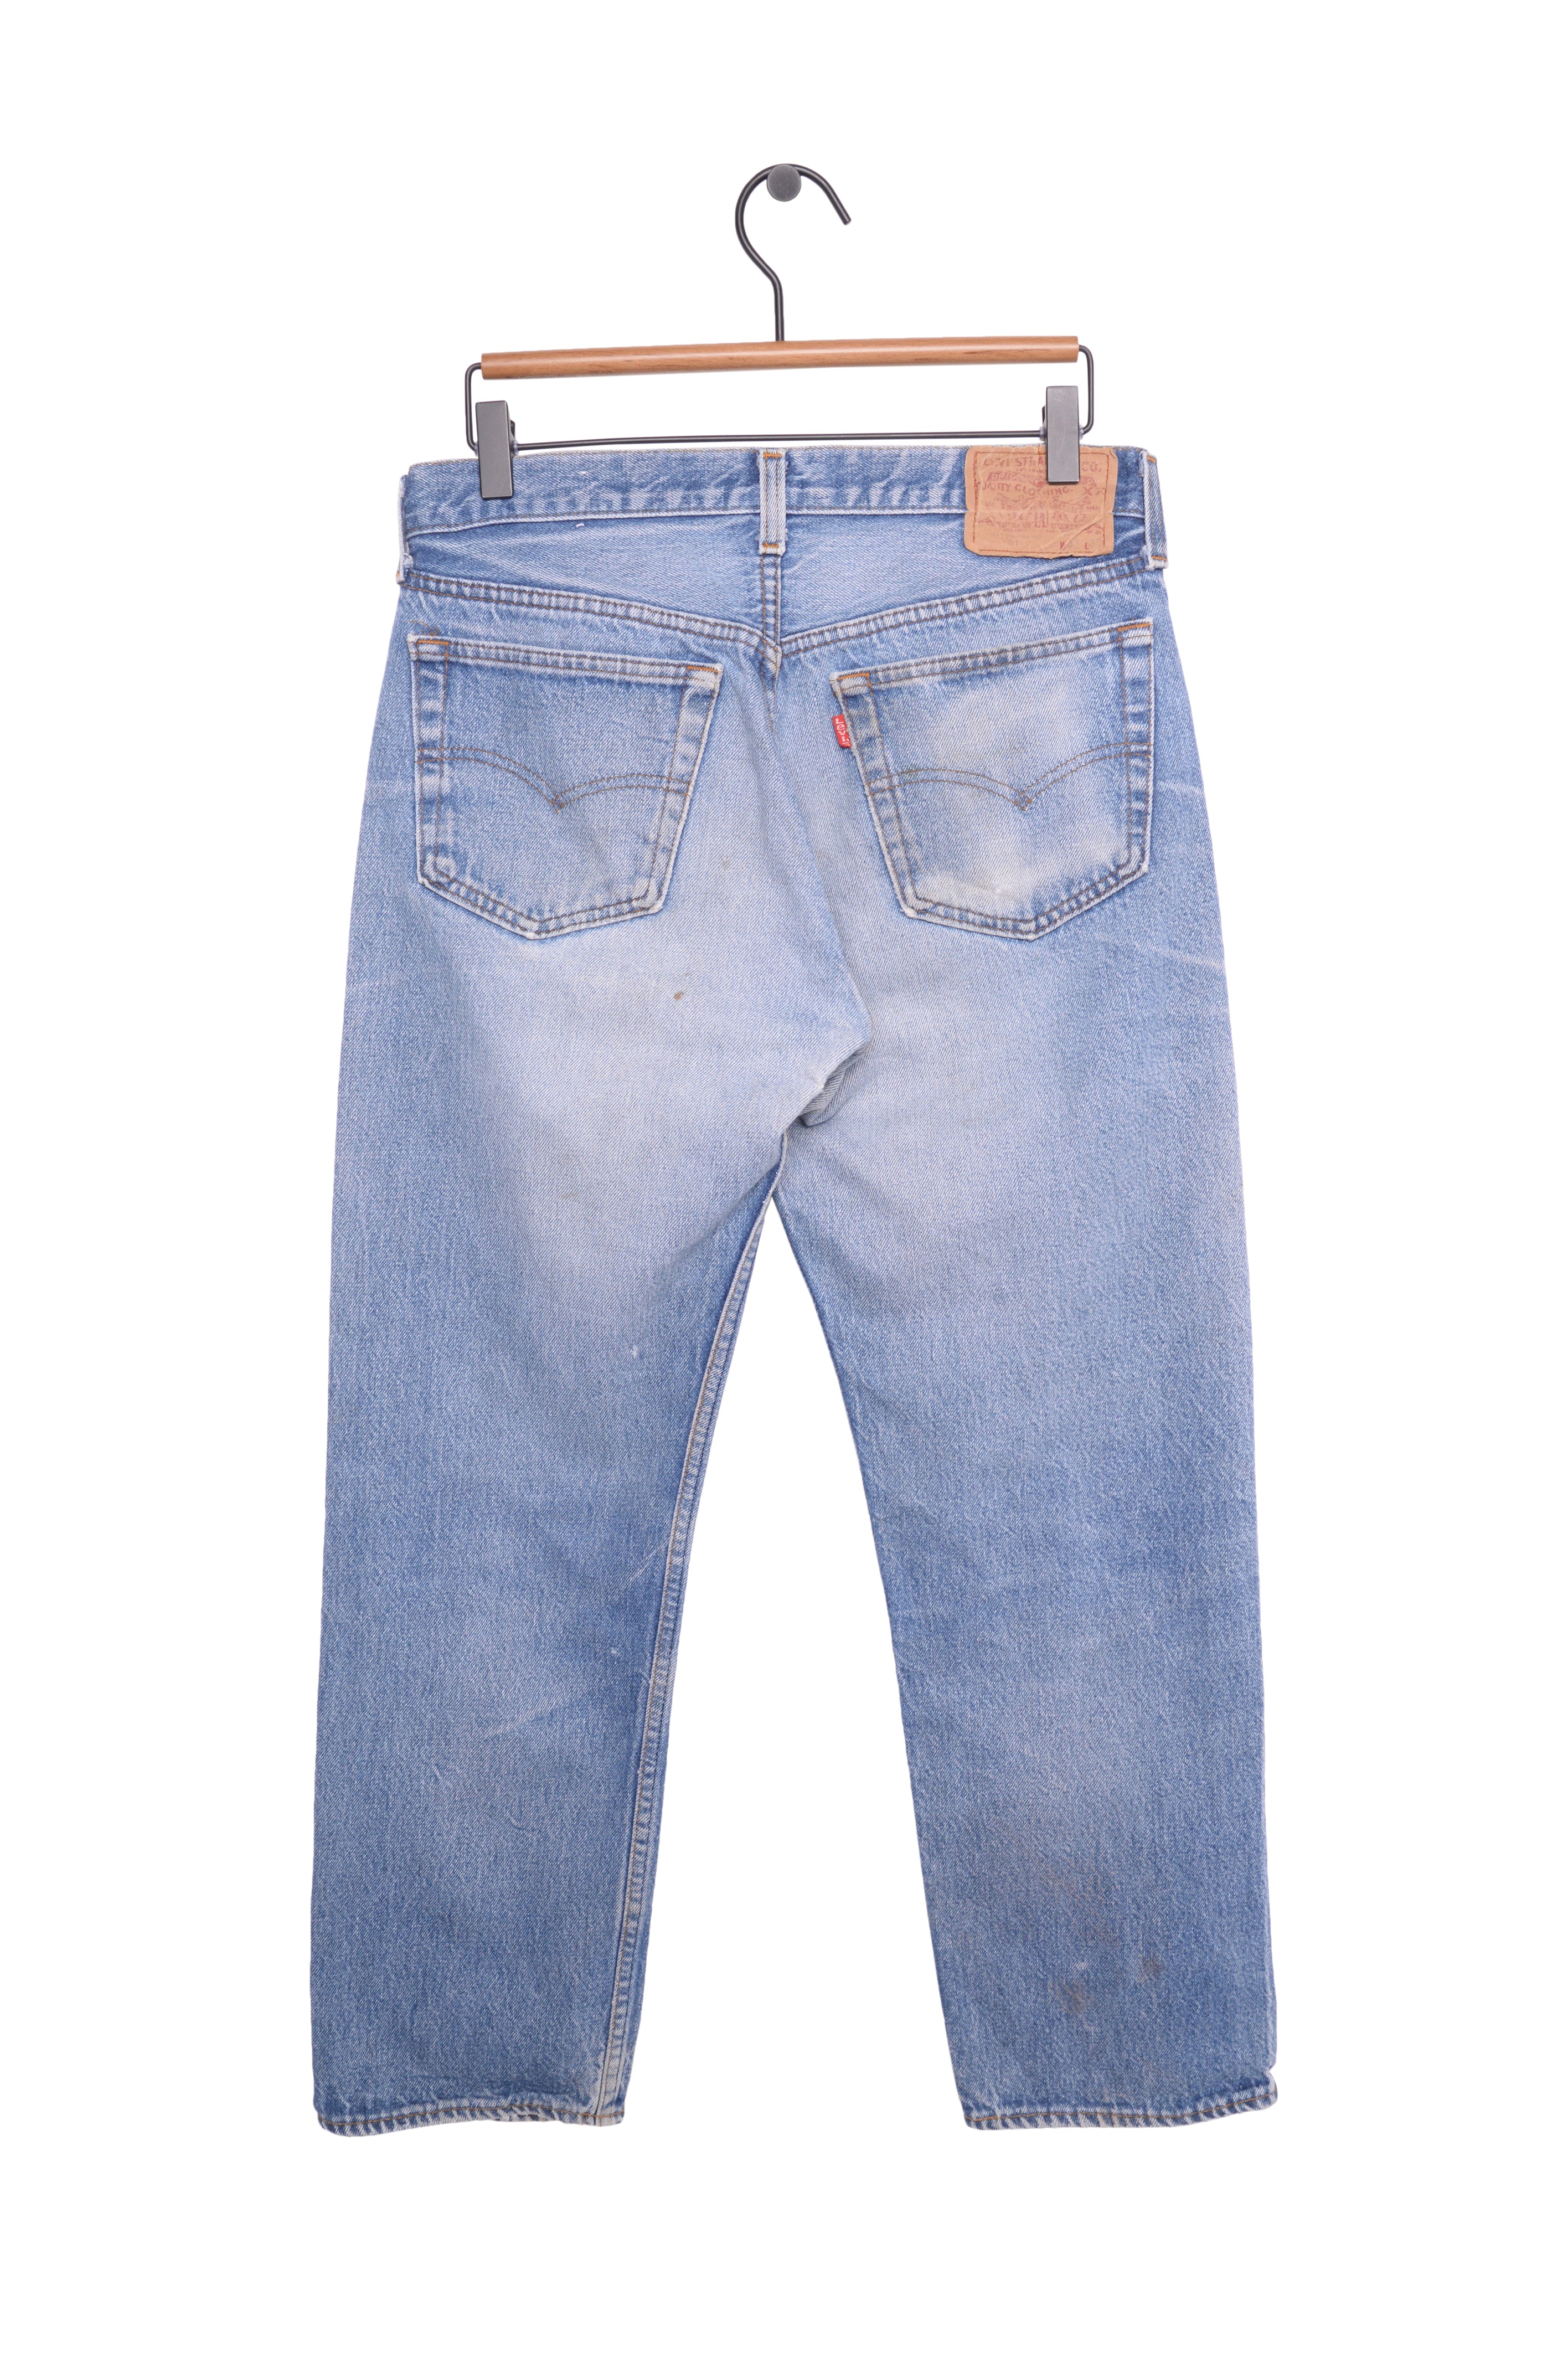 Faded Straight 501 Levi's Jeans 30W x 27L – The Vintage Twin